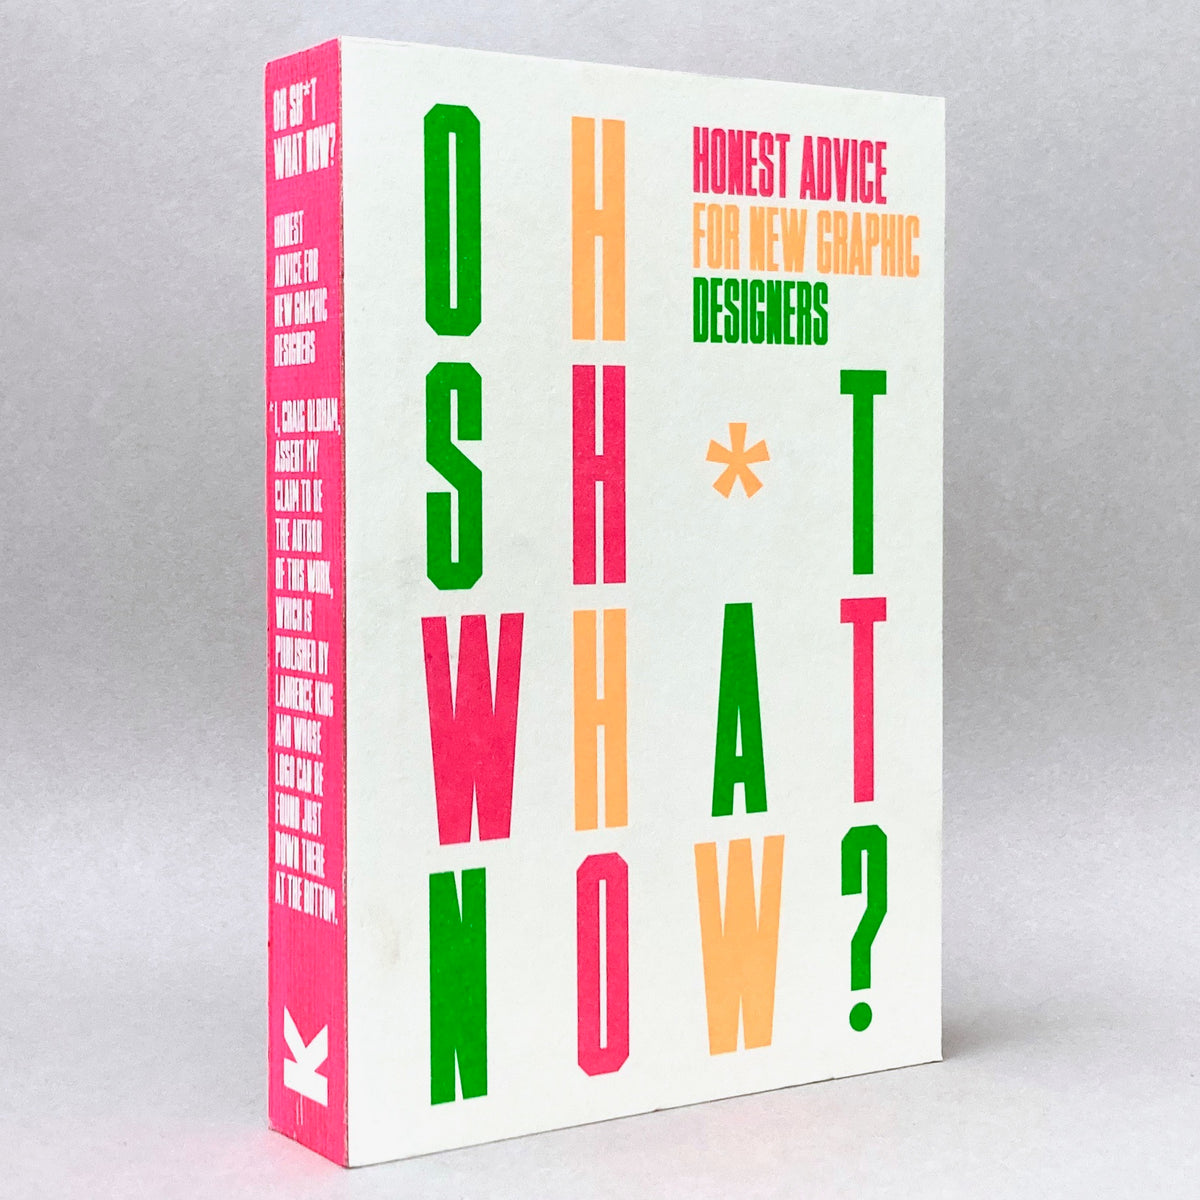 Oh Sh*t... What Now?: Honest Advice for New Graphic Designers (Non-mint)